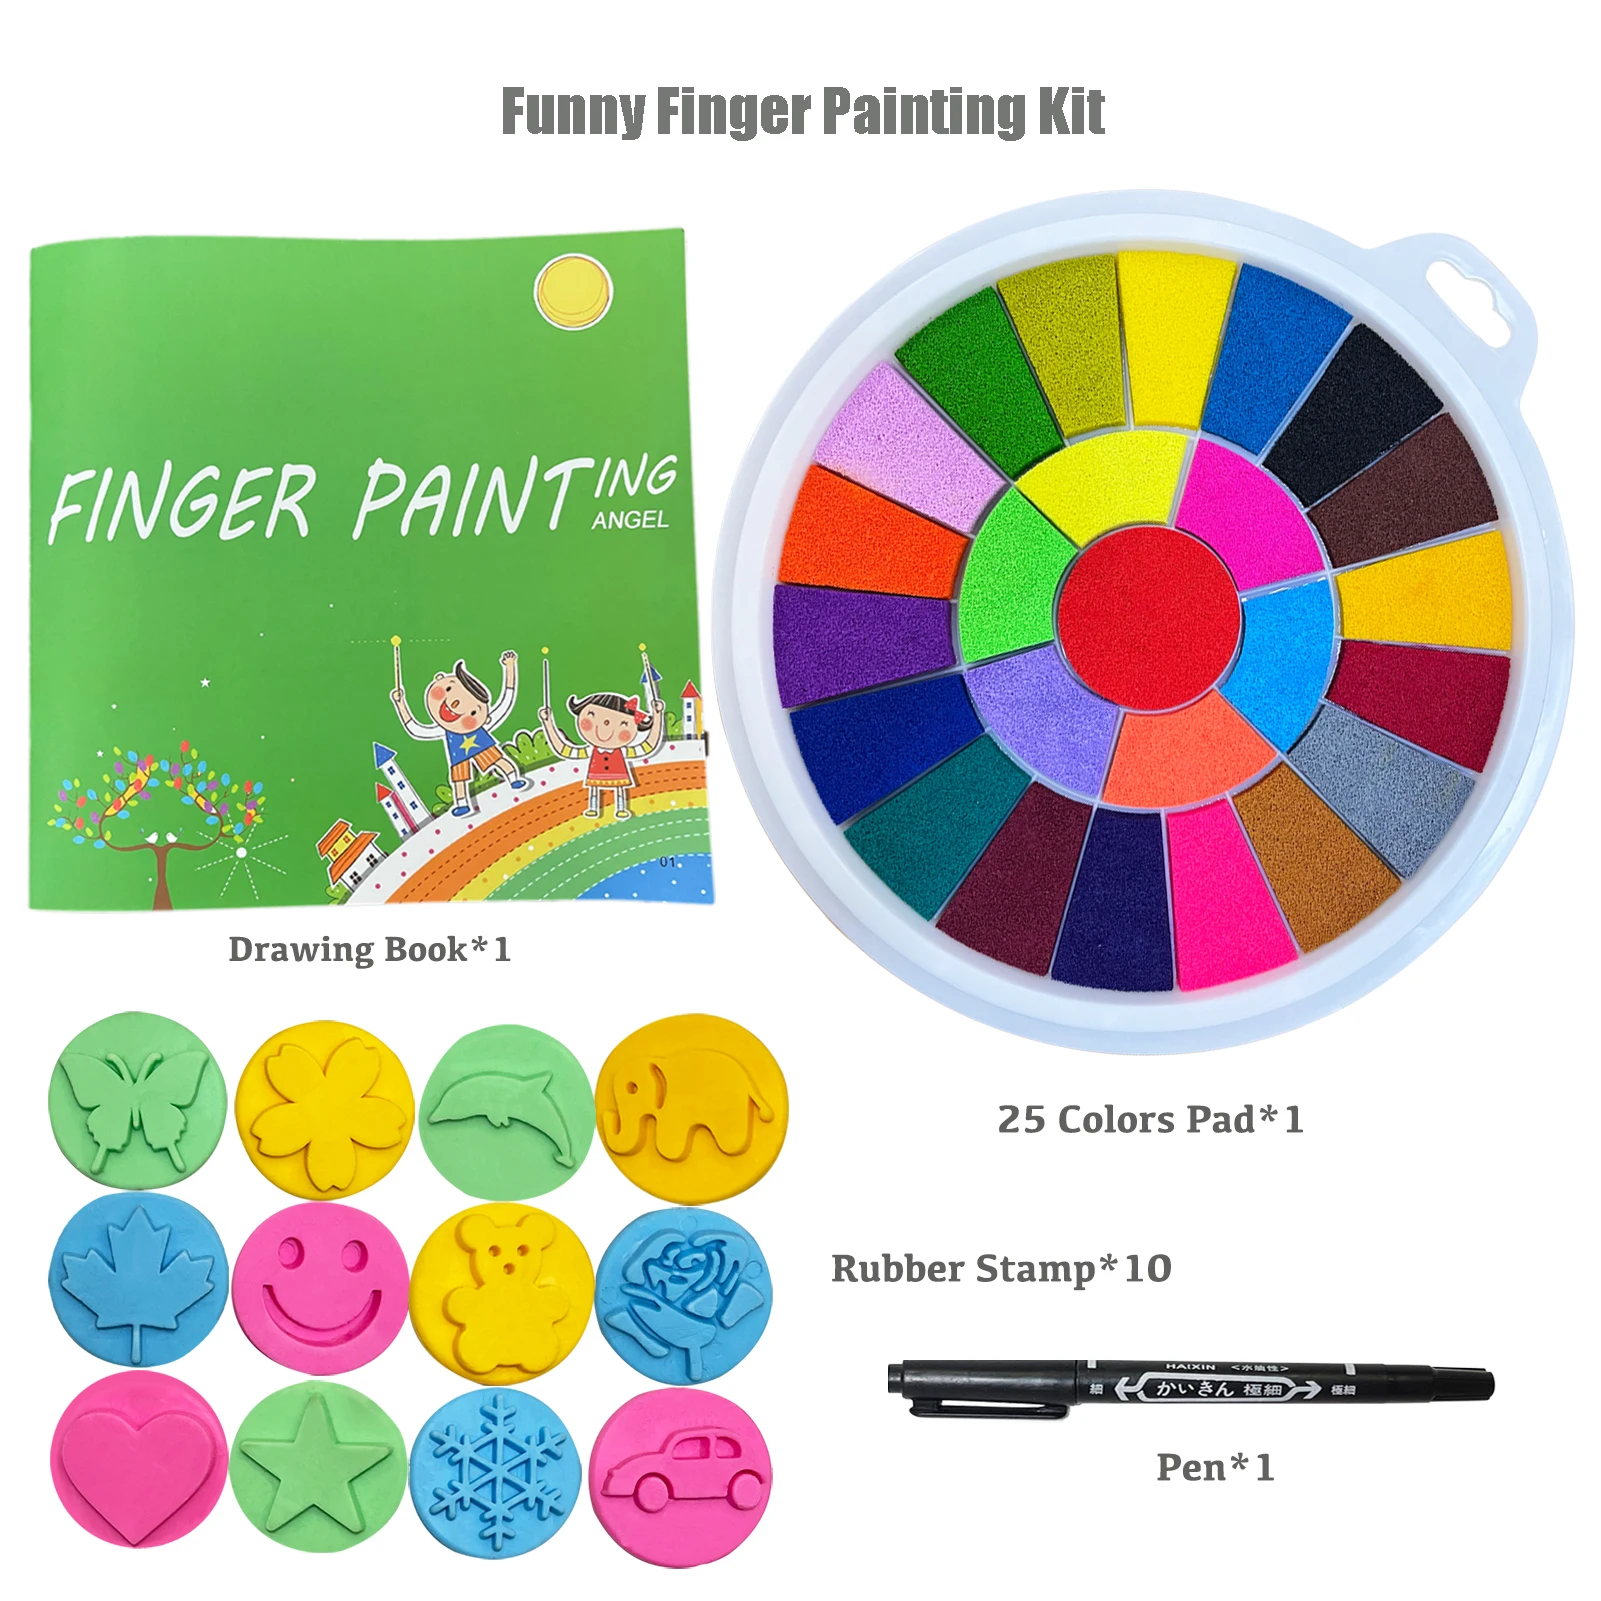 Fun Finger Painting and Book Kits for Kids Washable Finger Paint, Finger  Drawing Toys for Kids, Craft Painting, School Painting, 12 Colors 